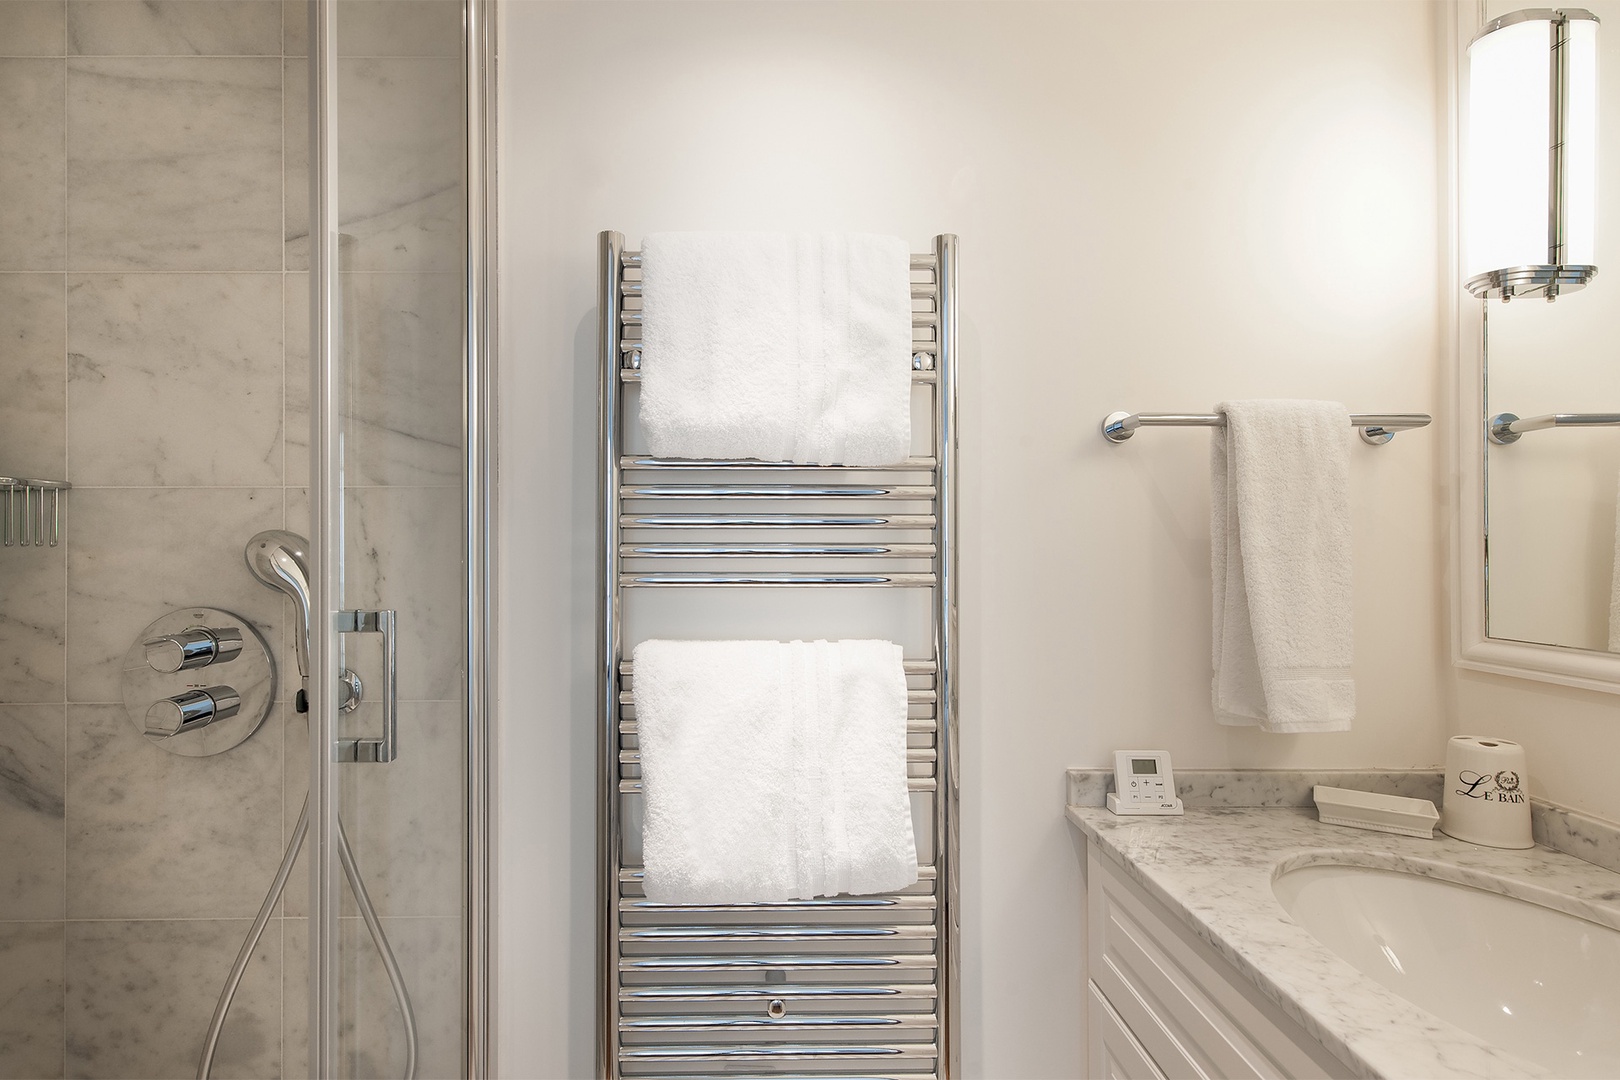 The heated towel rack lets you stay warm after your shower.